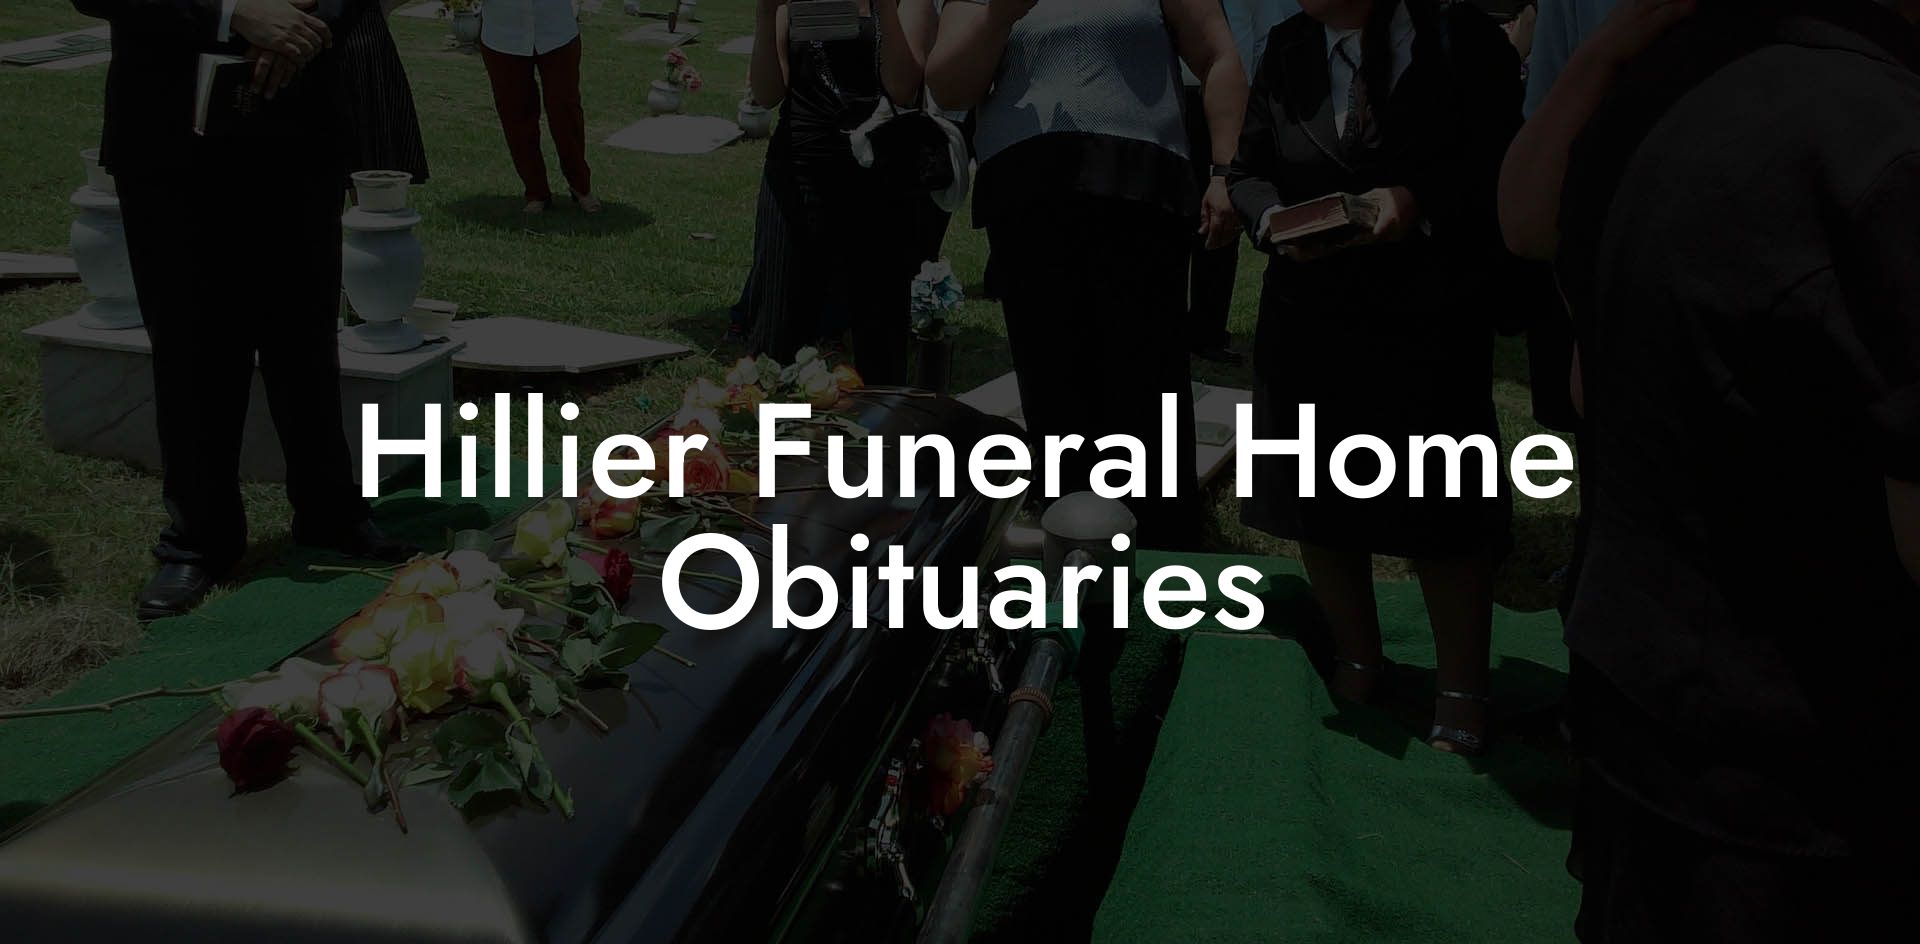 Hillier Funeral Home Obituaries